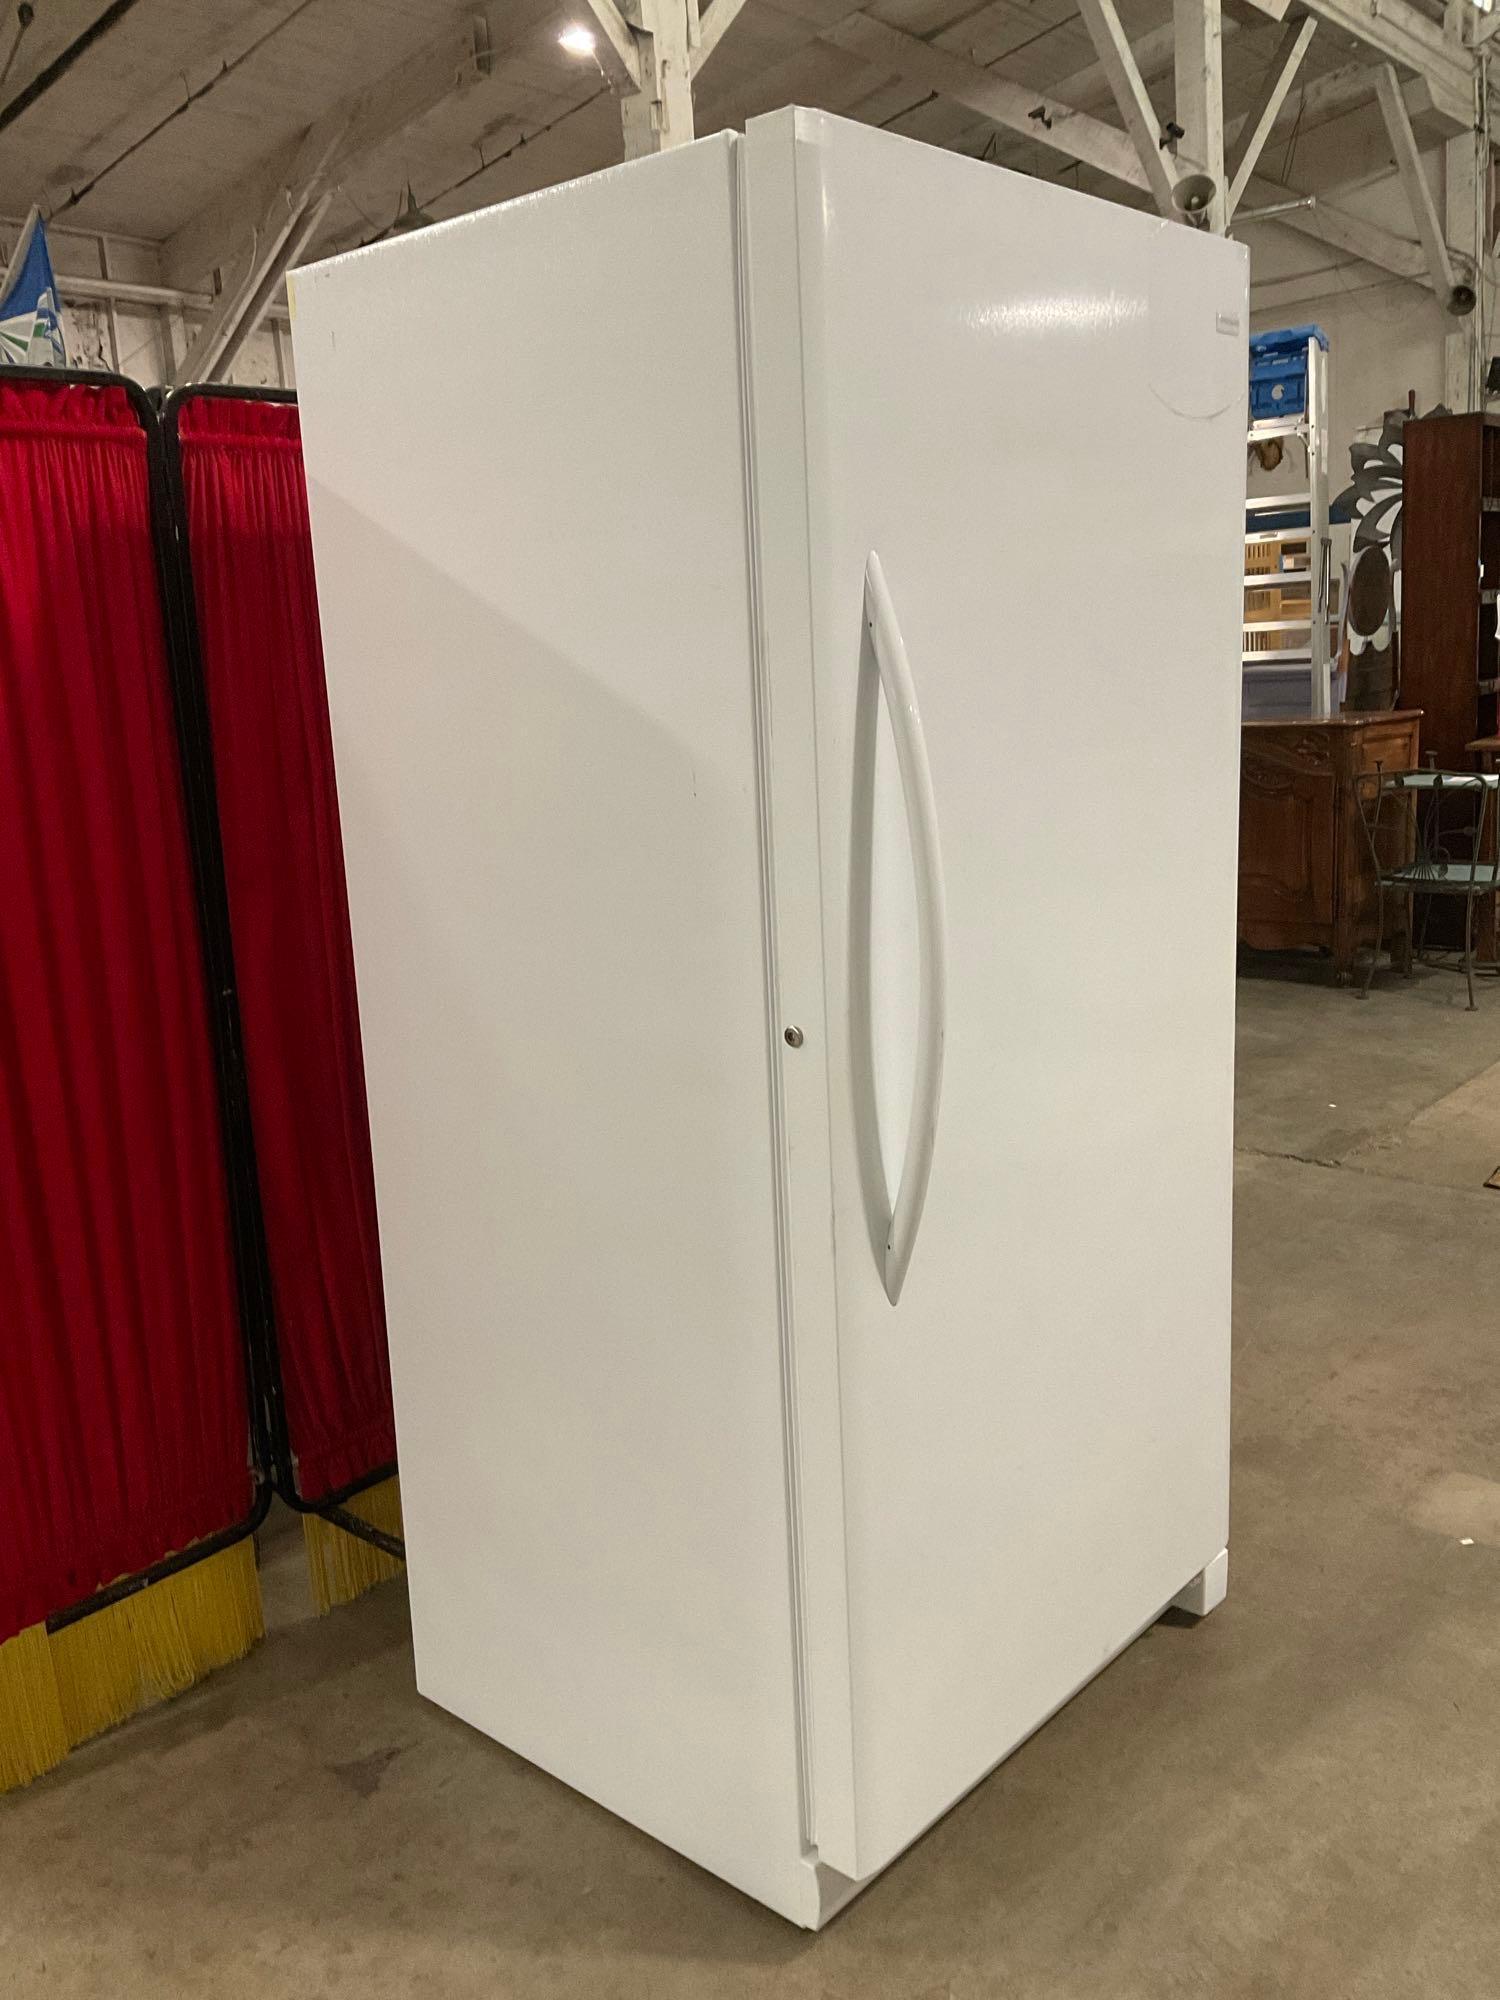 Frigidaire 20.2 Cu. Ft. Upright Freezer Model LFFH20F3QWF. White. Tested, Works. See pics.